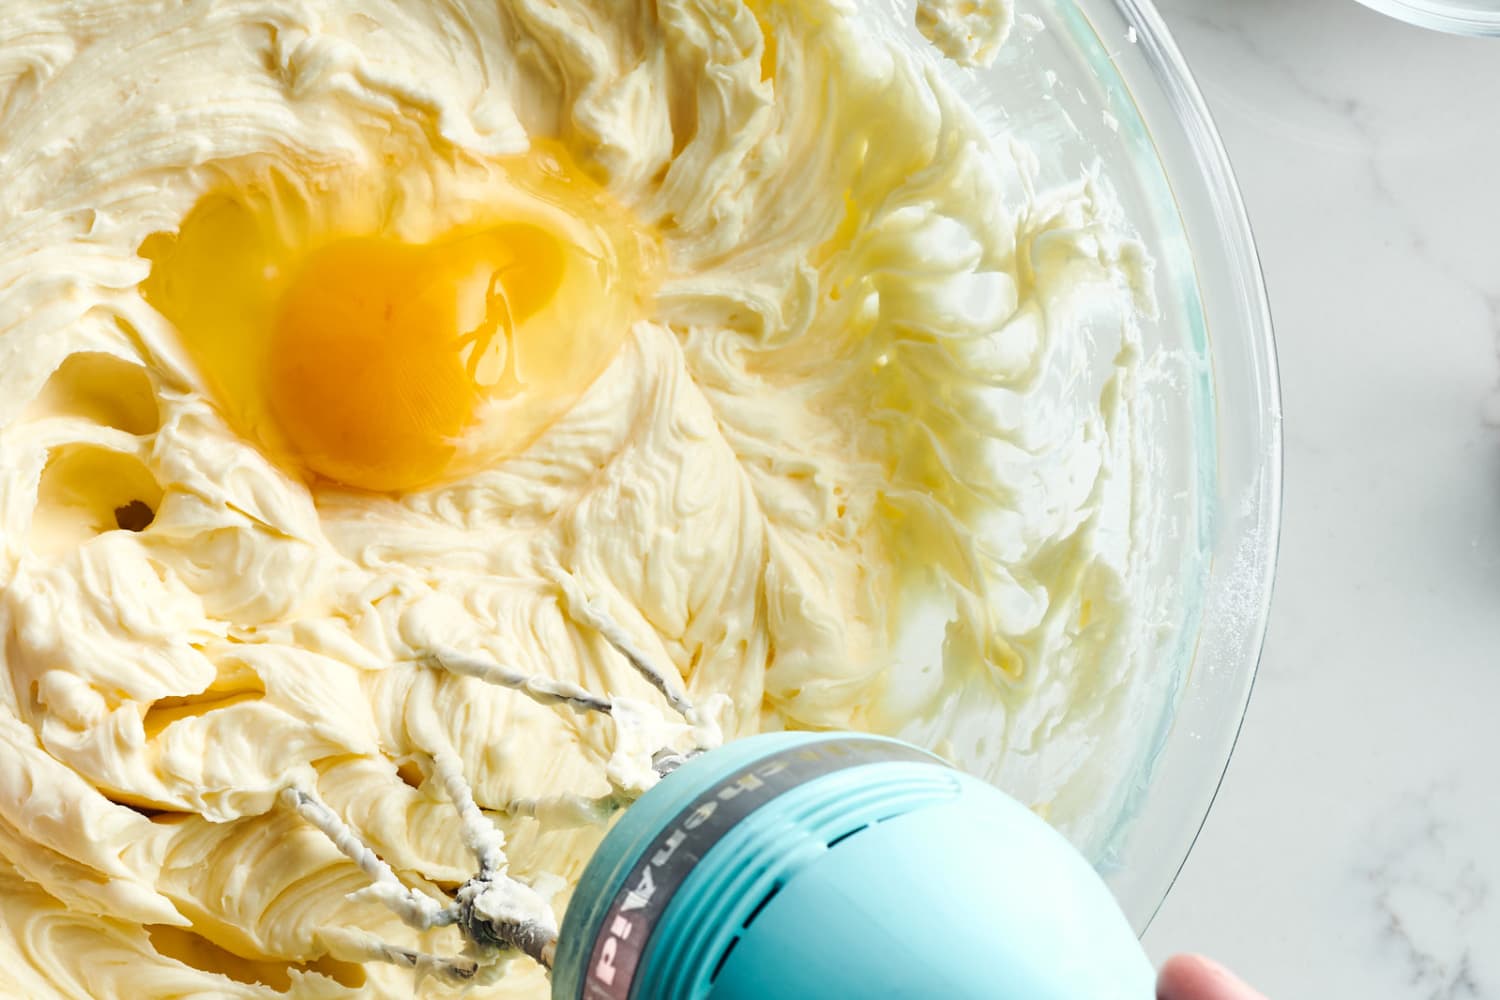 This Nifty Egg Cooking Gadget Is 20% Off for Black Friday